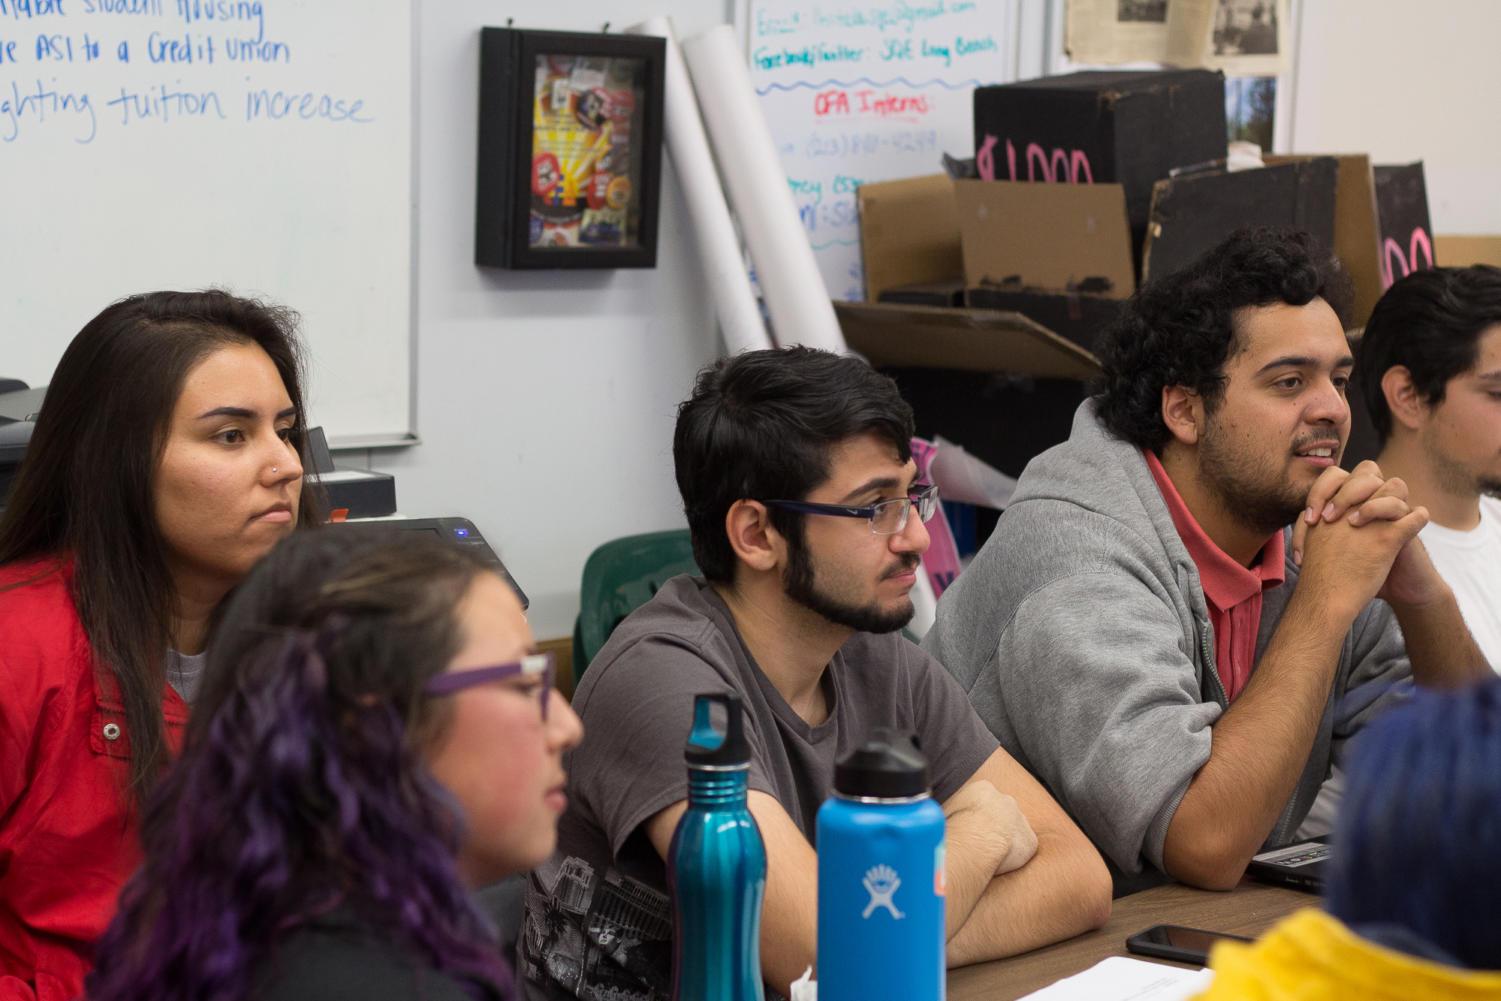 Students from the Cal State Long Beach Youth Democratic Socialists of America gathered in the Faculty Offices 4 building for the first meeting of the semester on Wednesday.